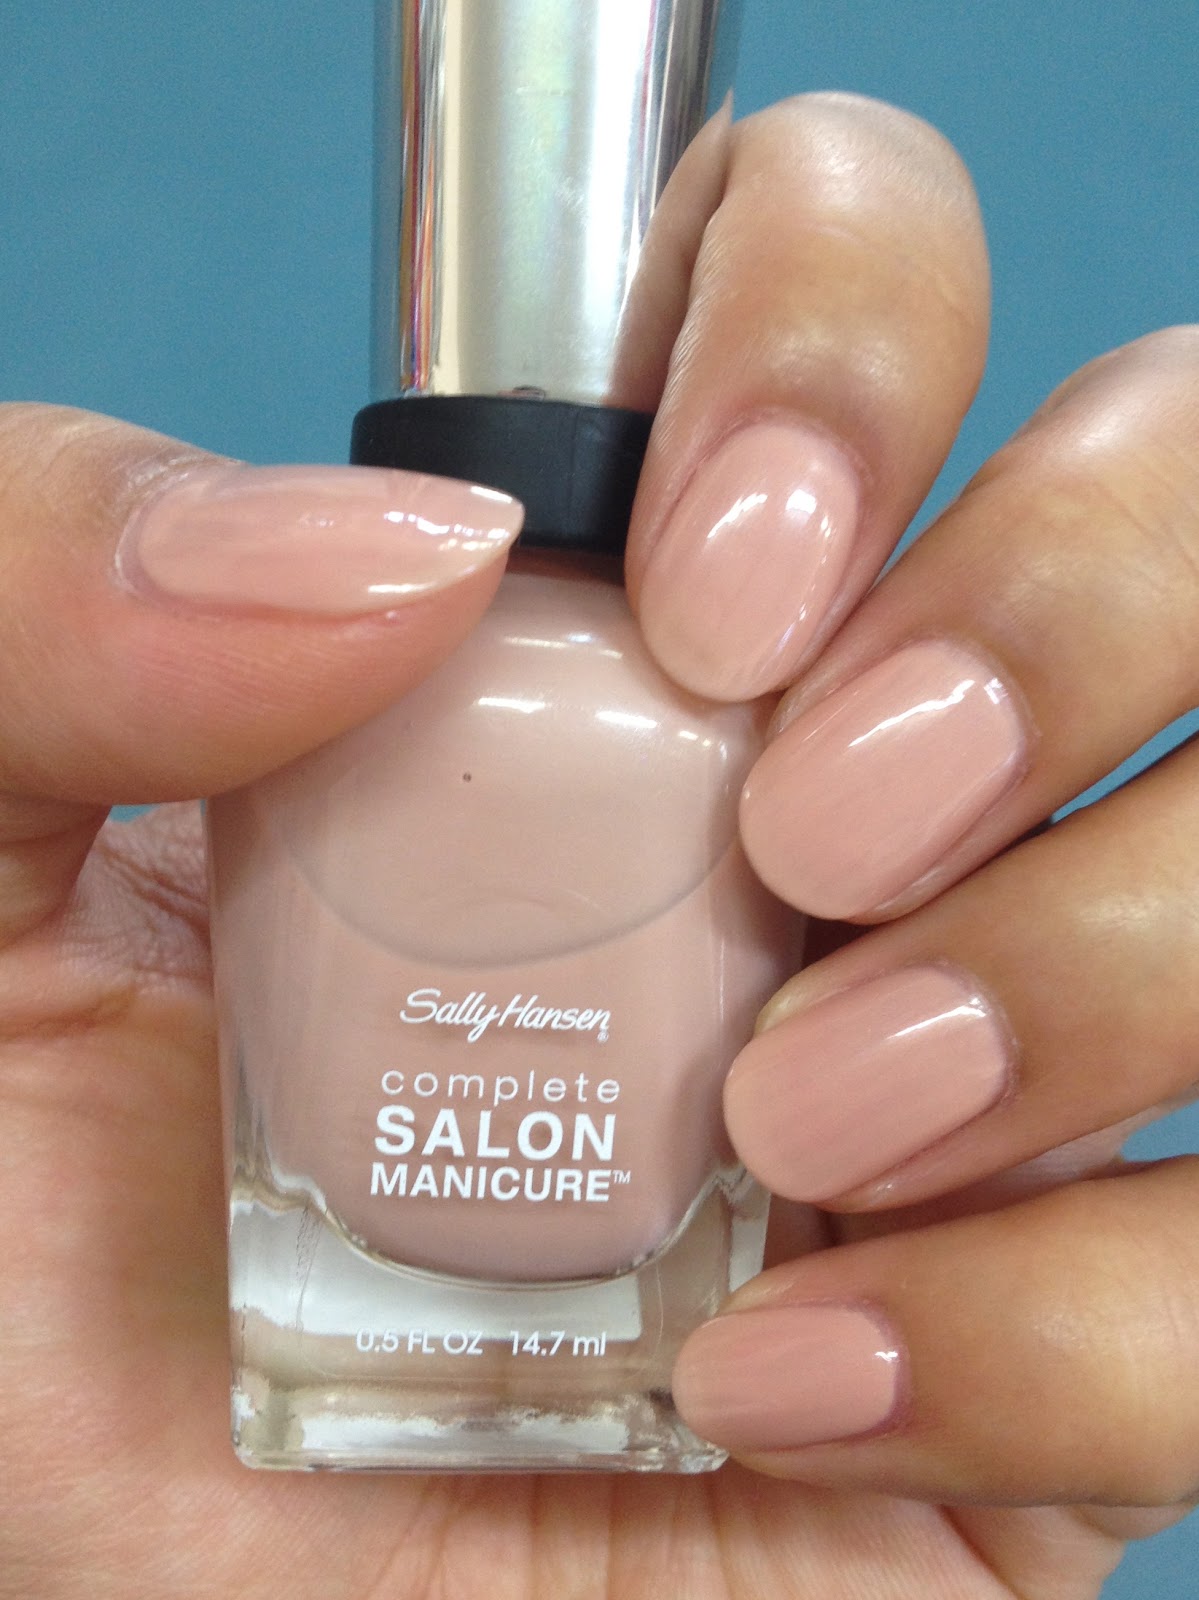 The Bridal Hairstylist Sally Hanson Complete Salon Manicure Nail Polish Swatches